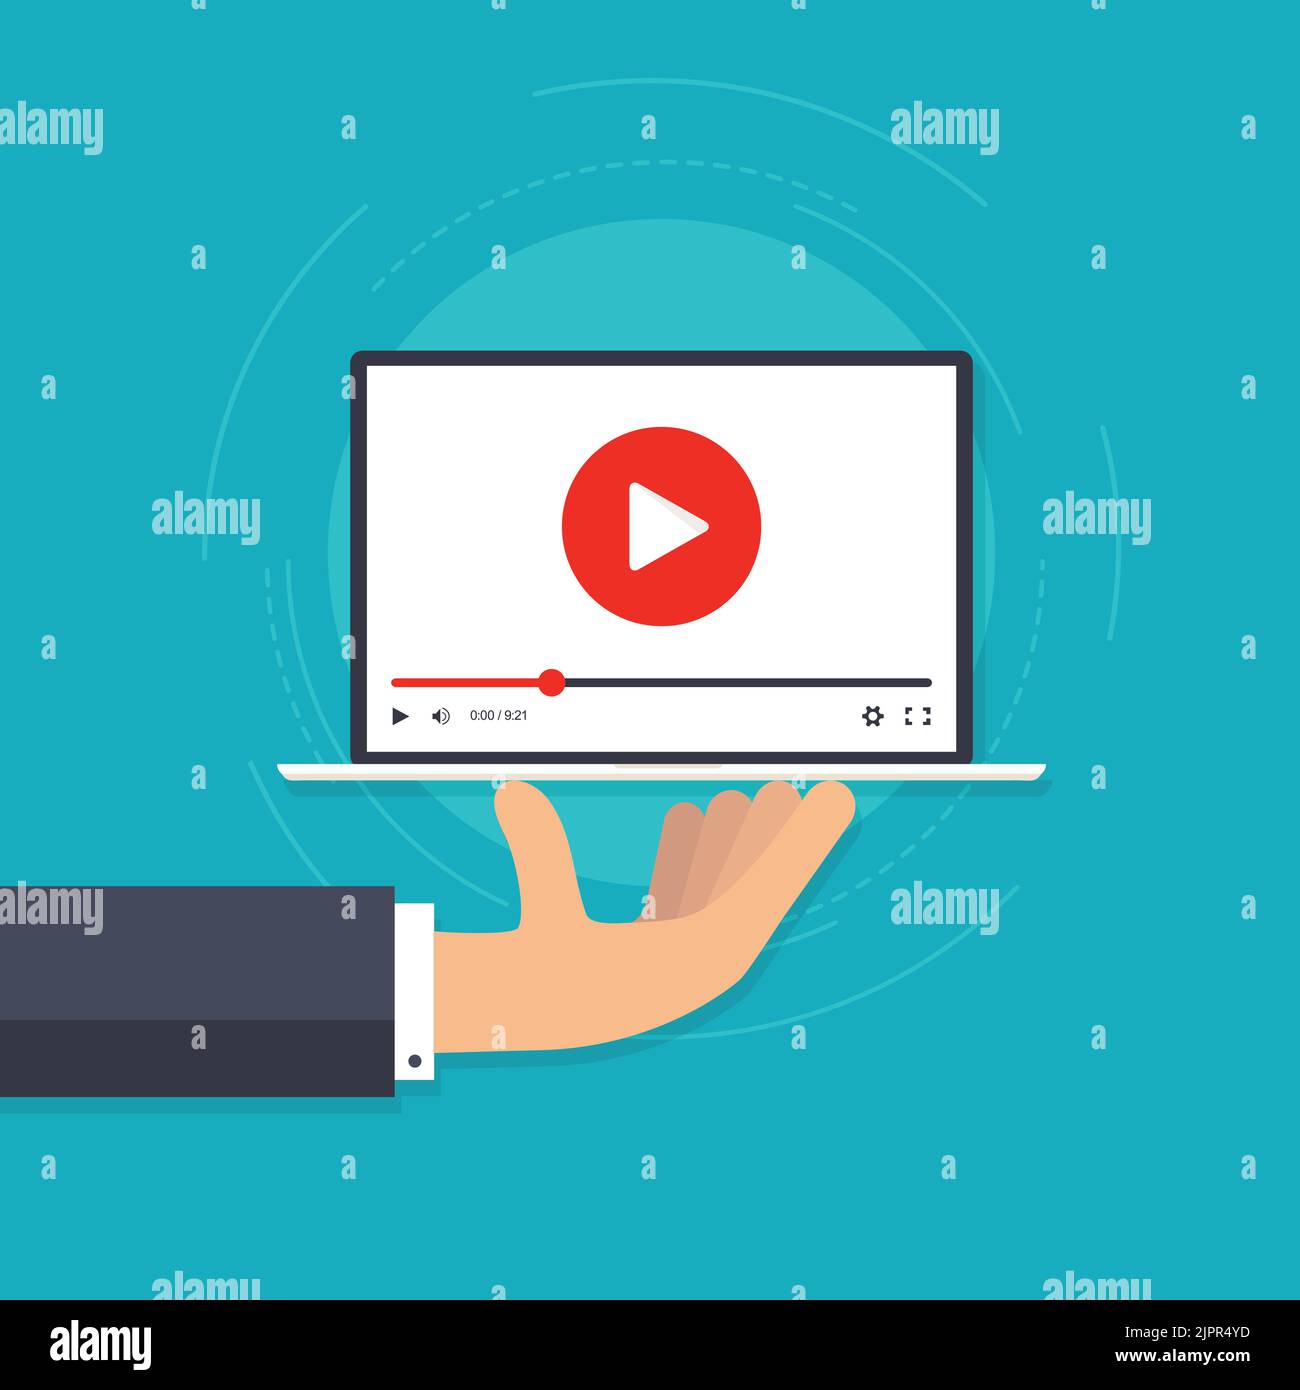 Hand holding laptop with video player. Video playback on laptop. Webinar advertising icon. Social media presentation. Online learning tutorial player Stock Vector